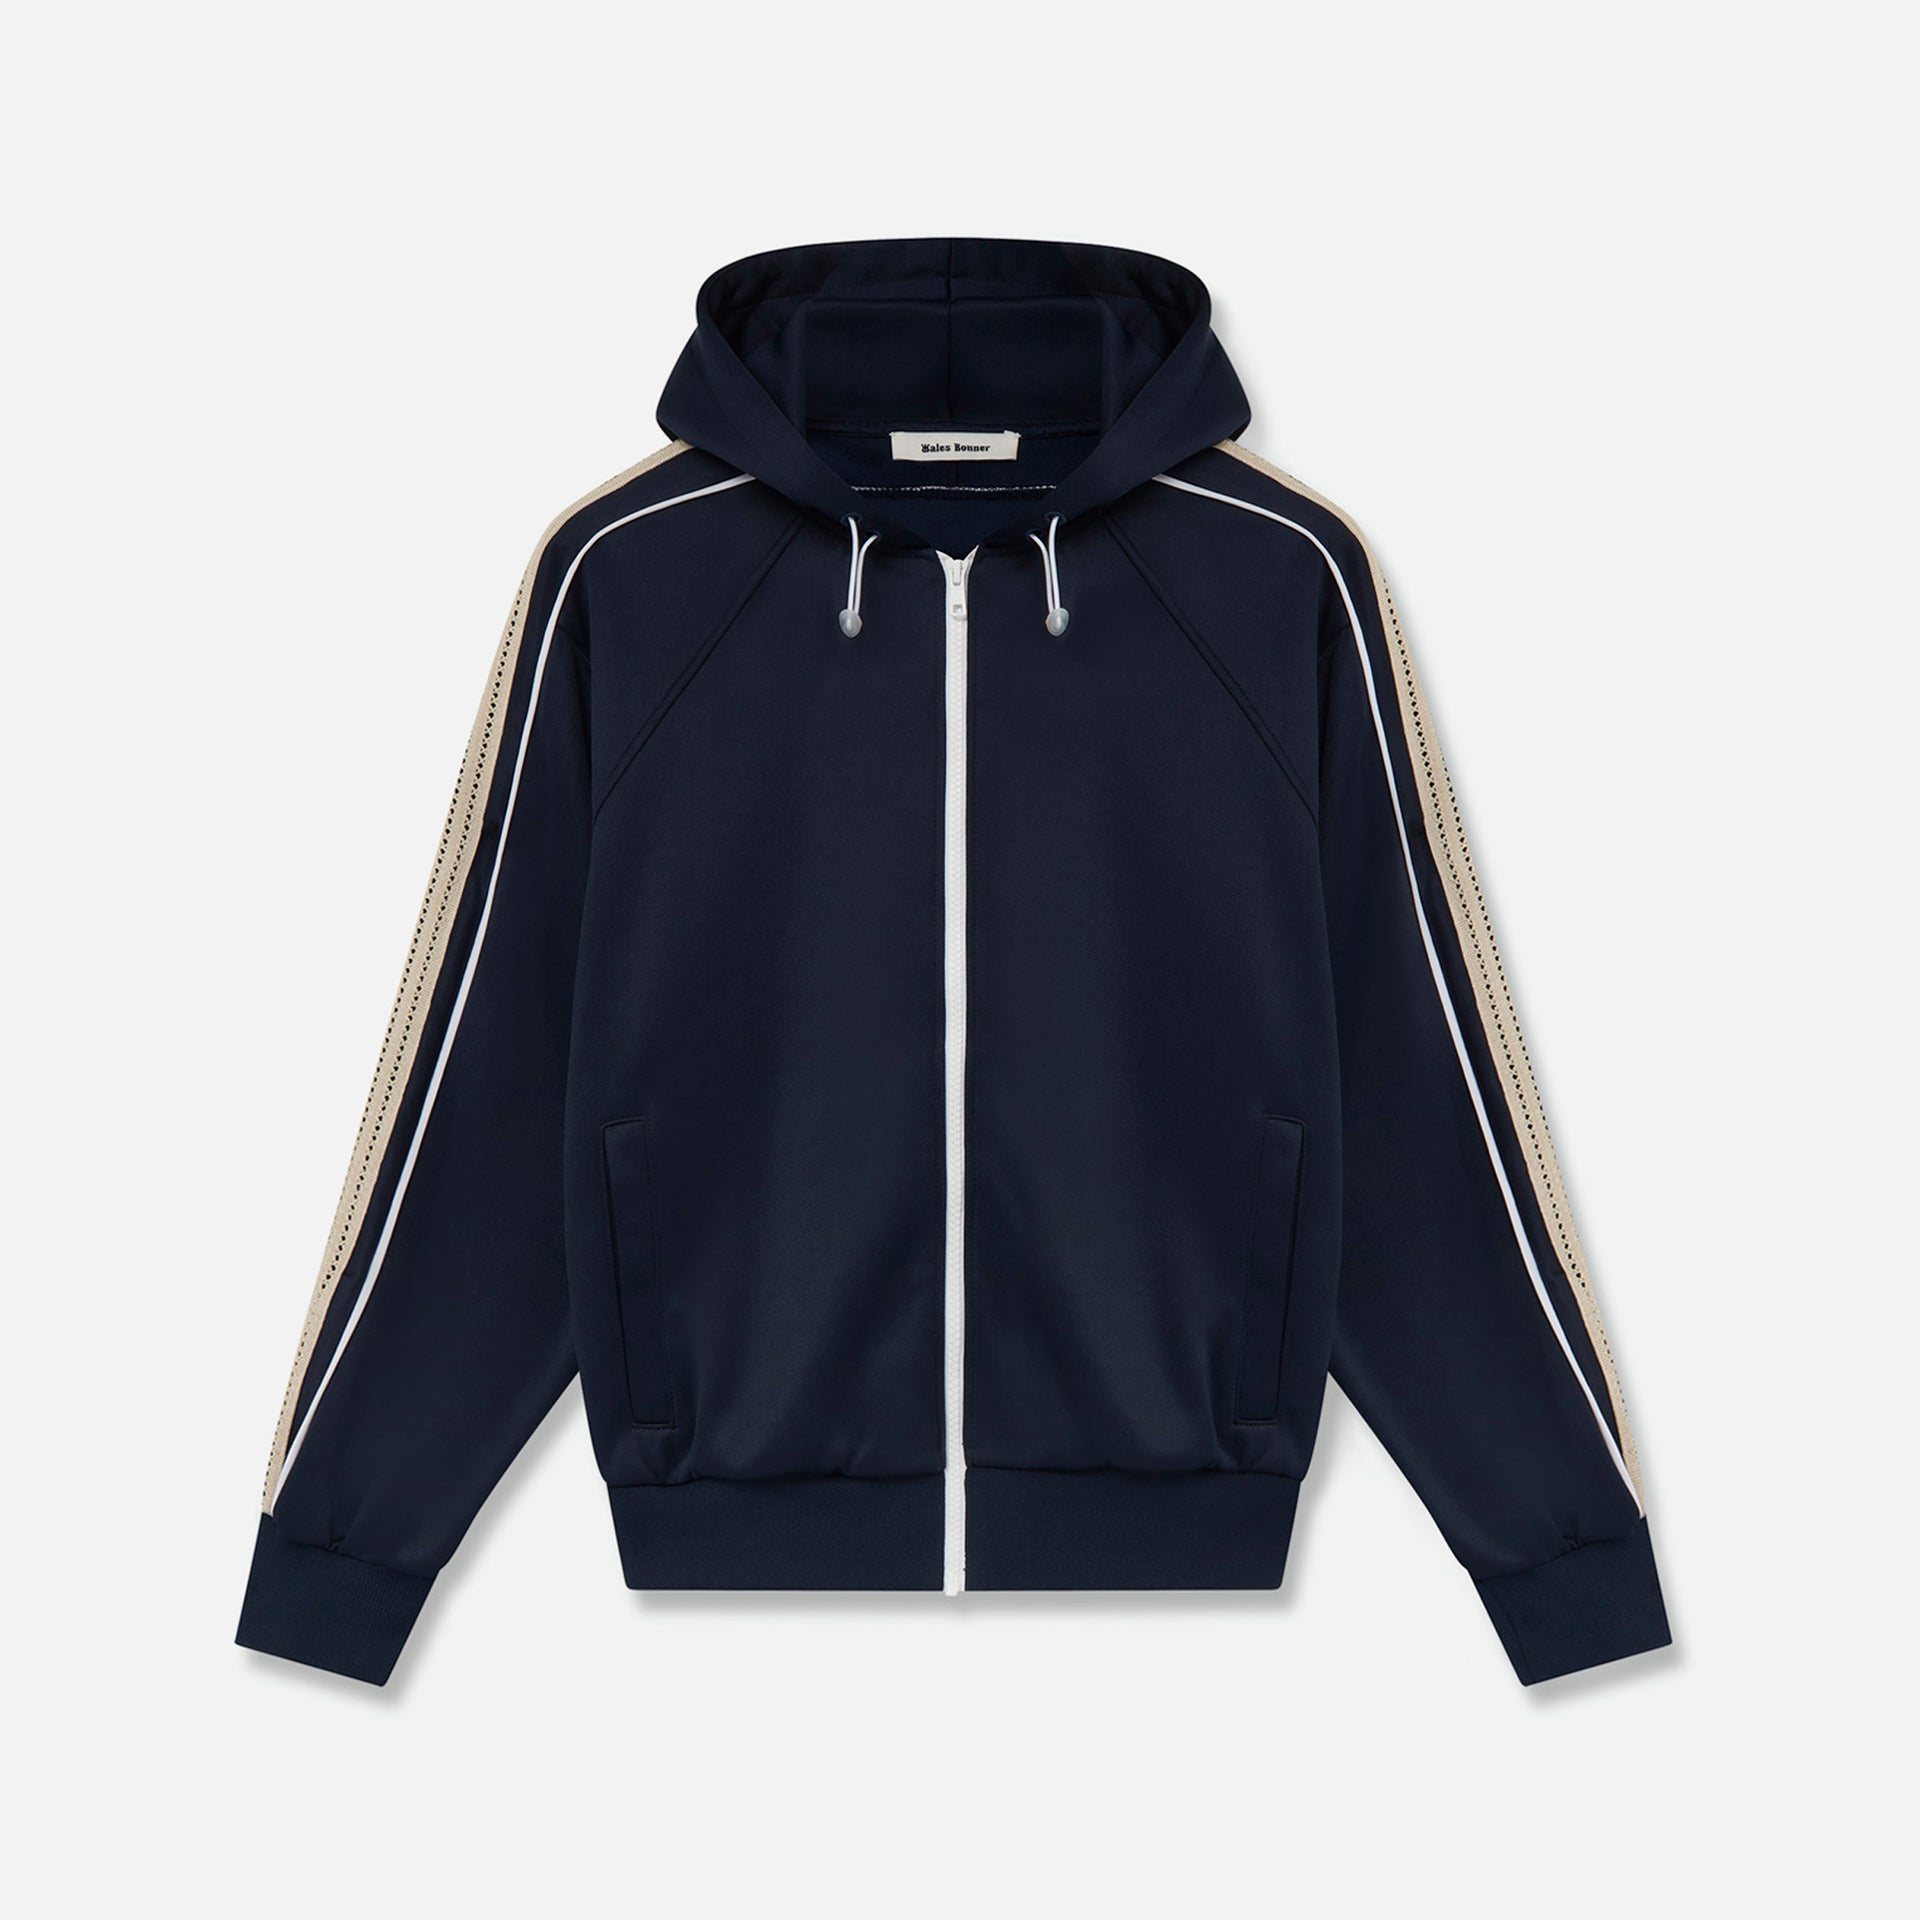 Wales Bonner Mantra Hoodie button-up - Navy